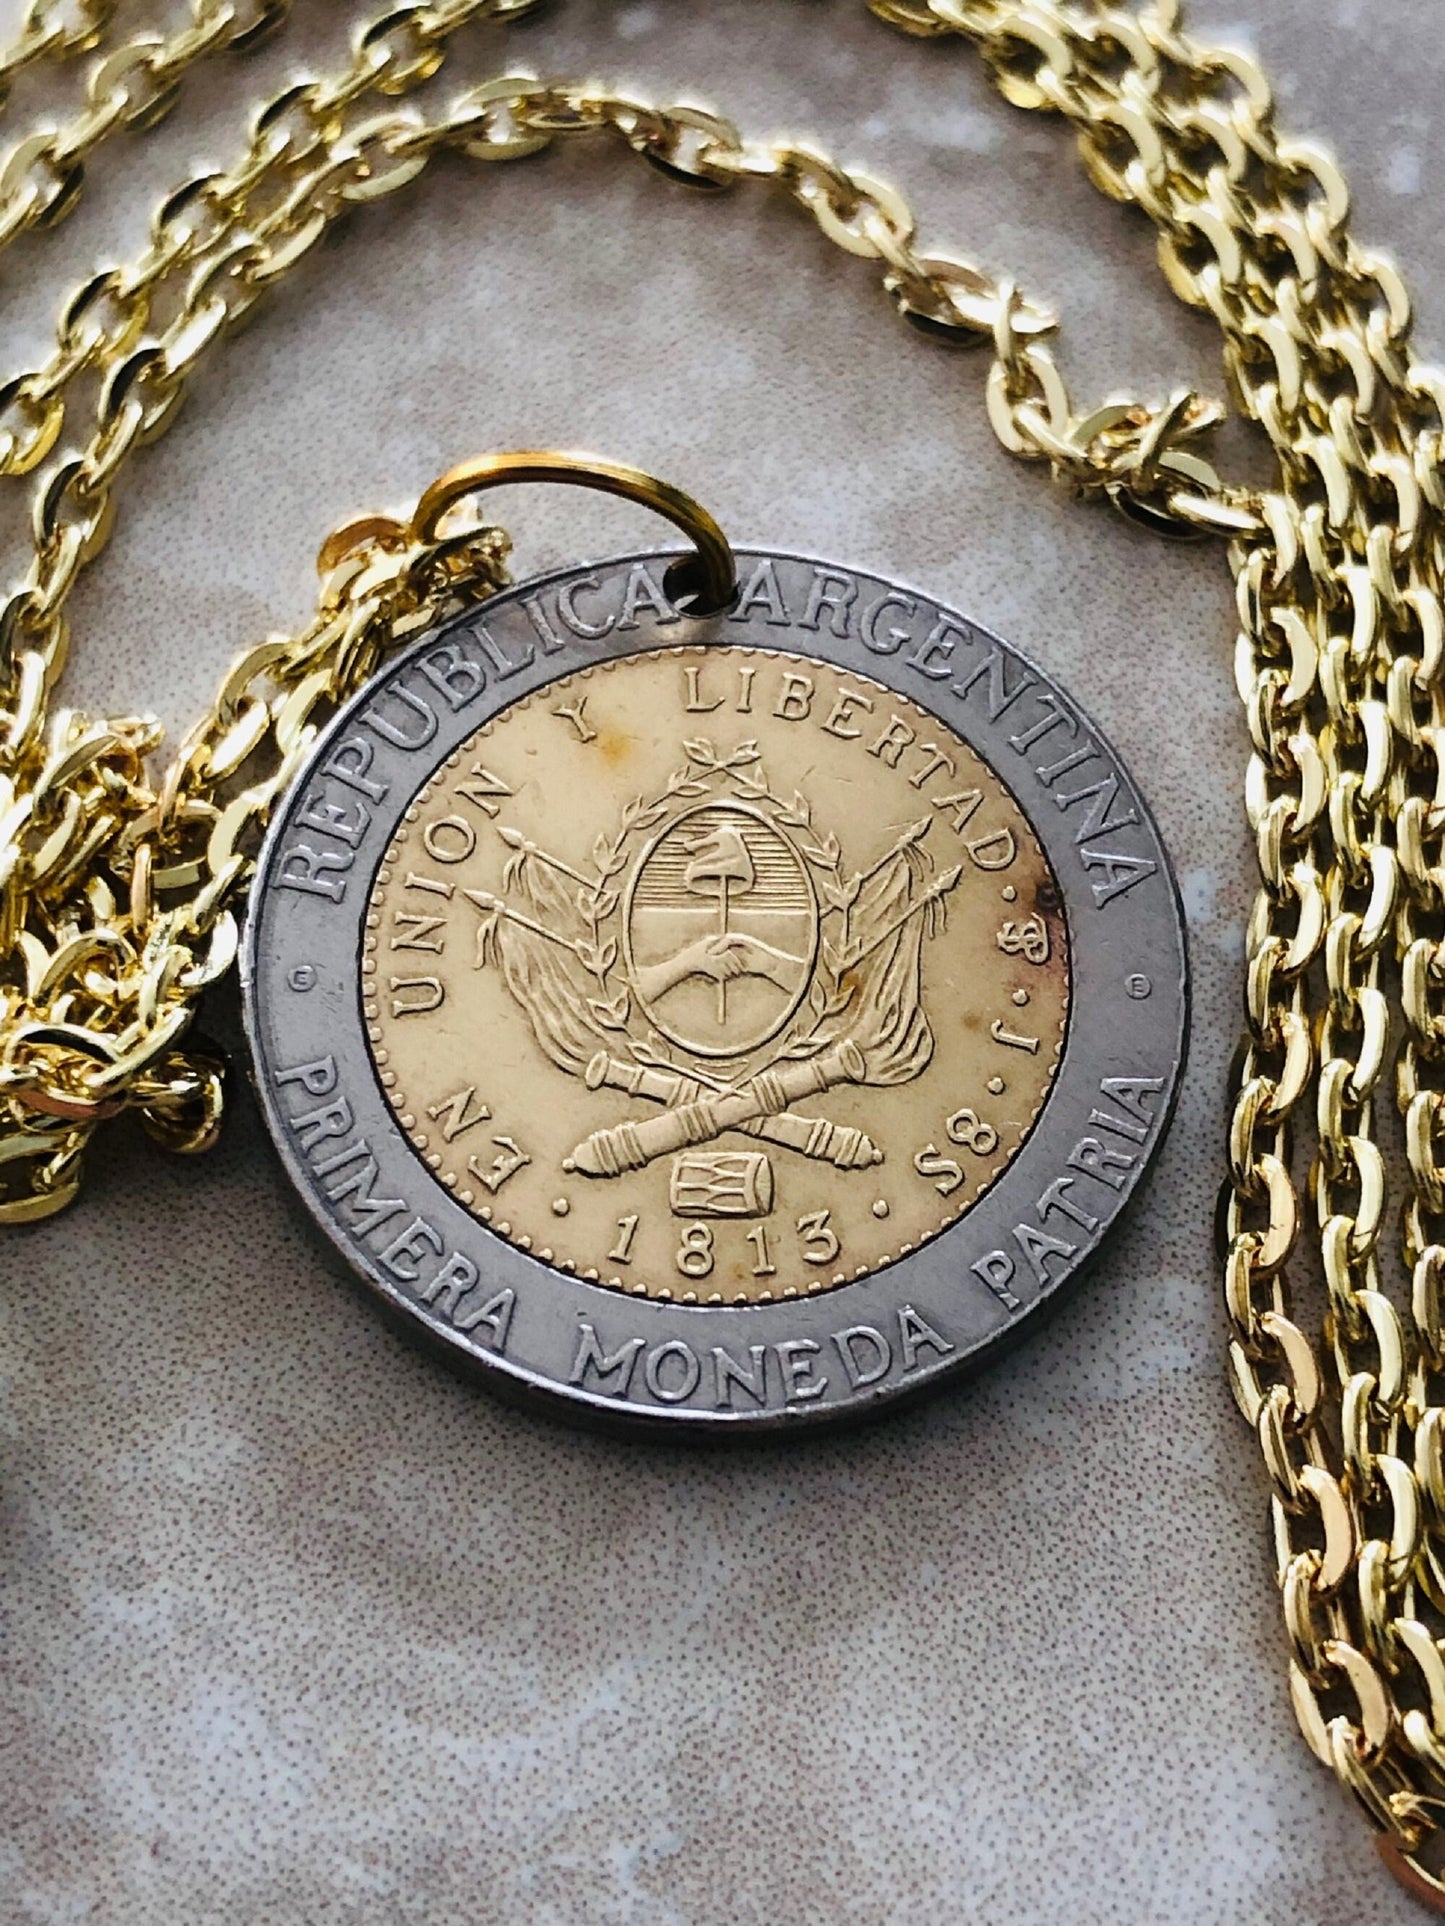 Argentina Coin Necklace Del Rio Argentinian Pendant Personal Old Vintage Handmade Jewelry Gift Friend Charm For Him Her World Coin Collector